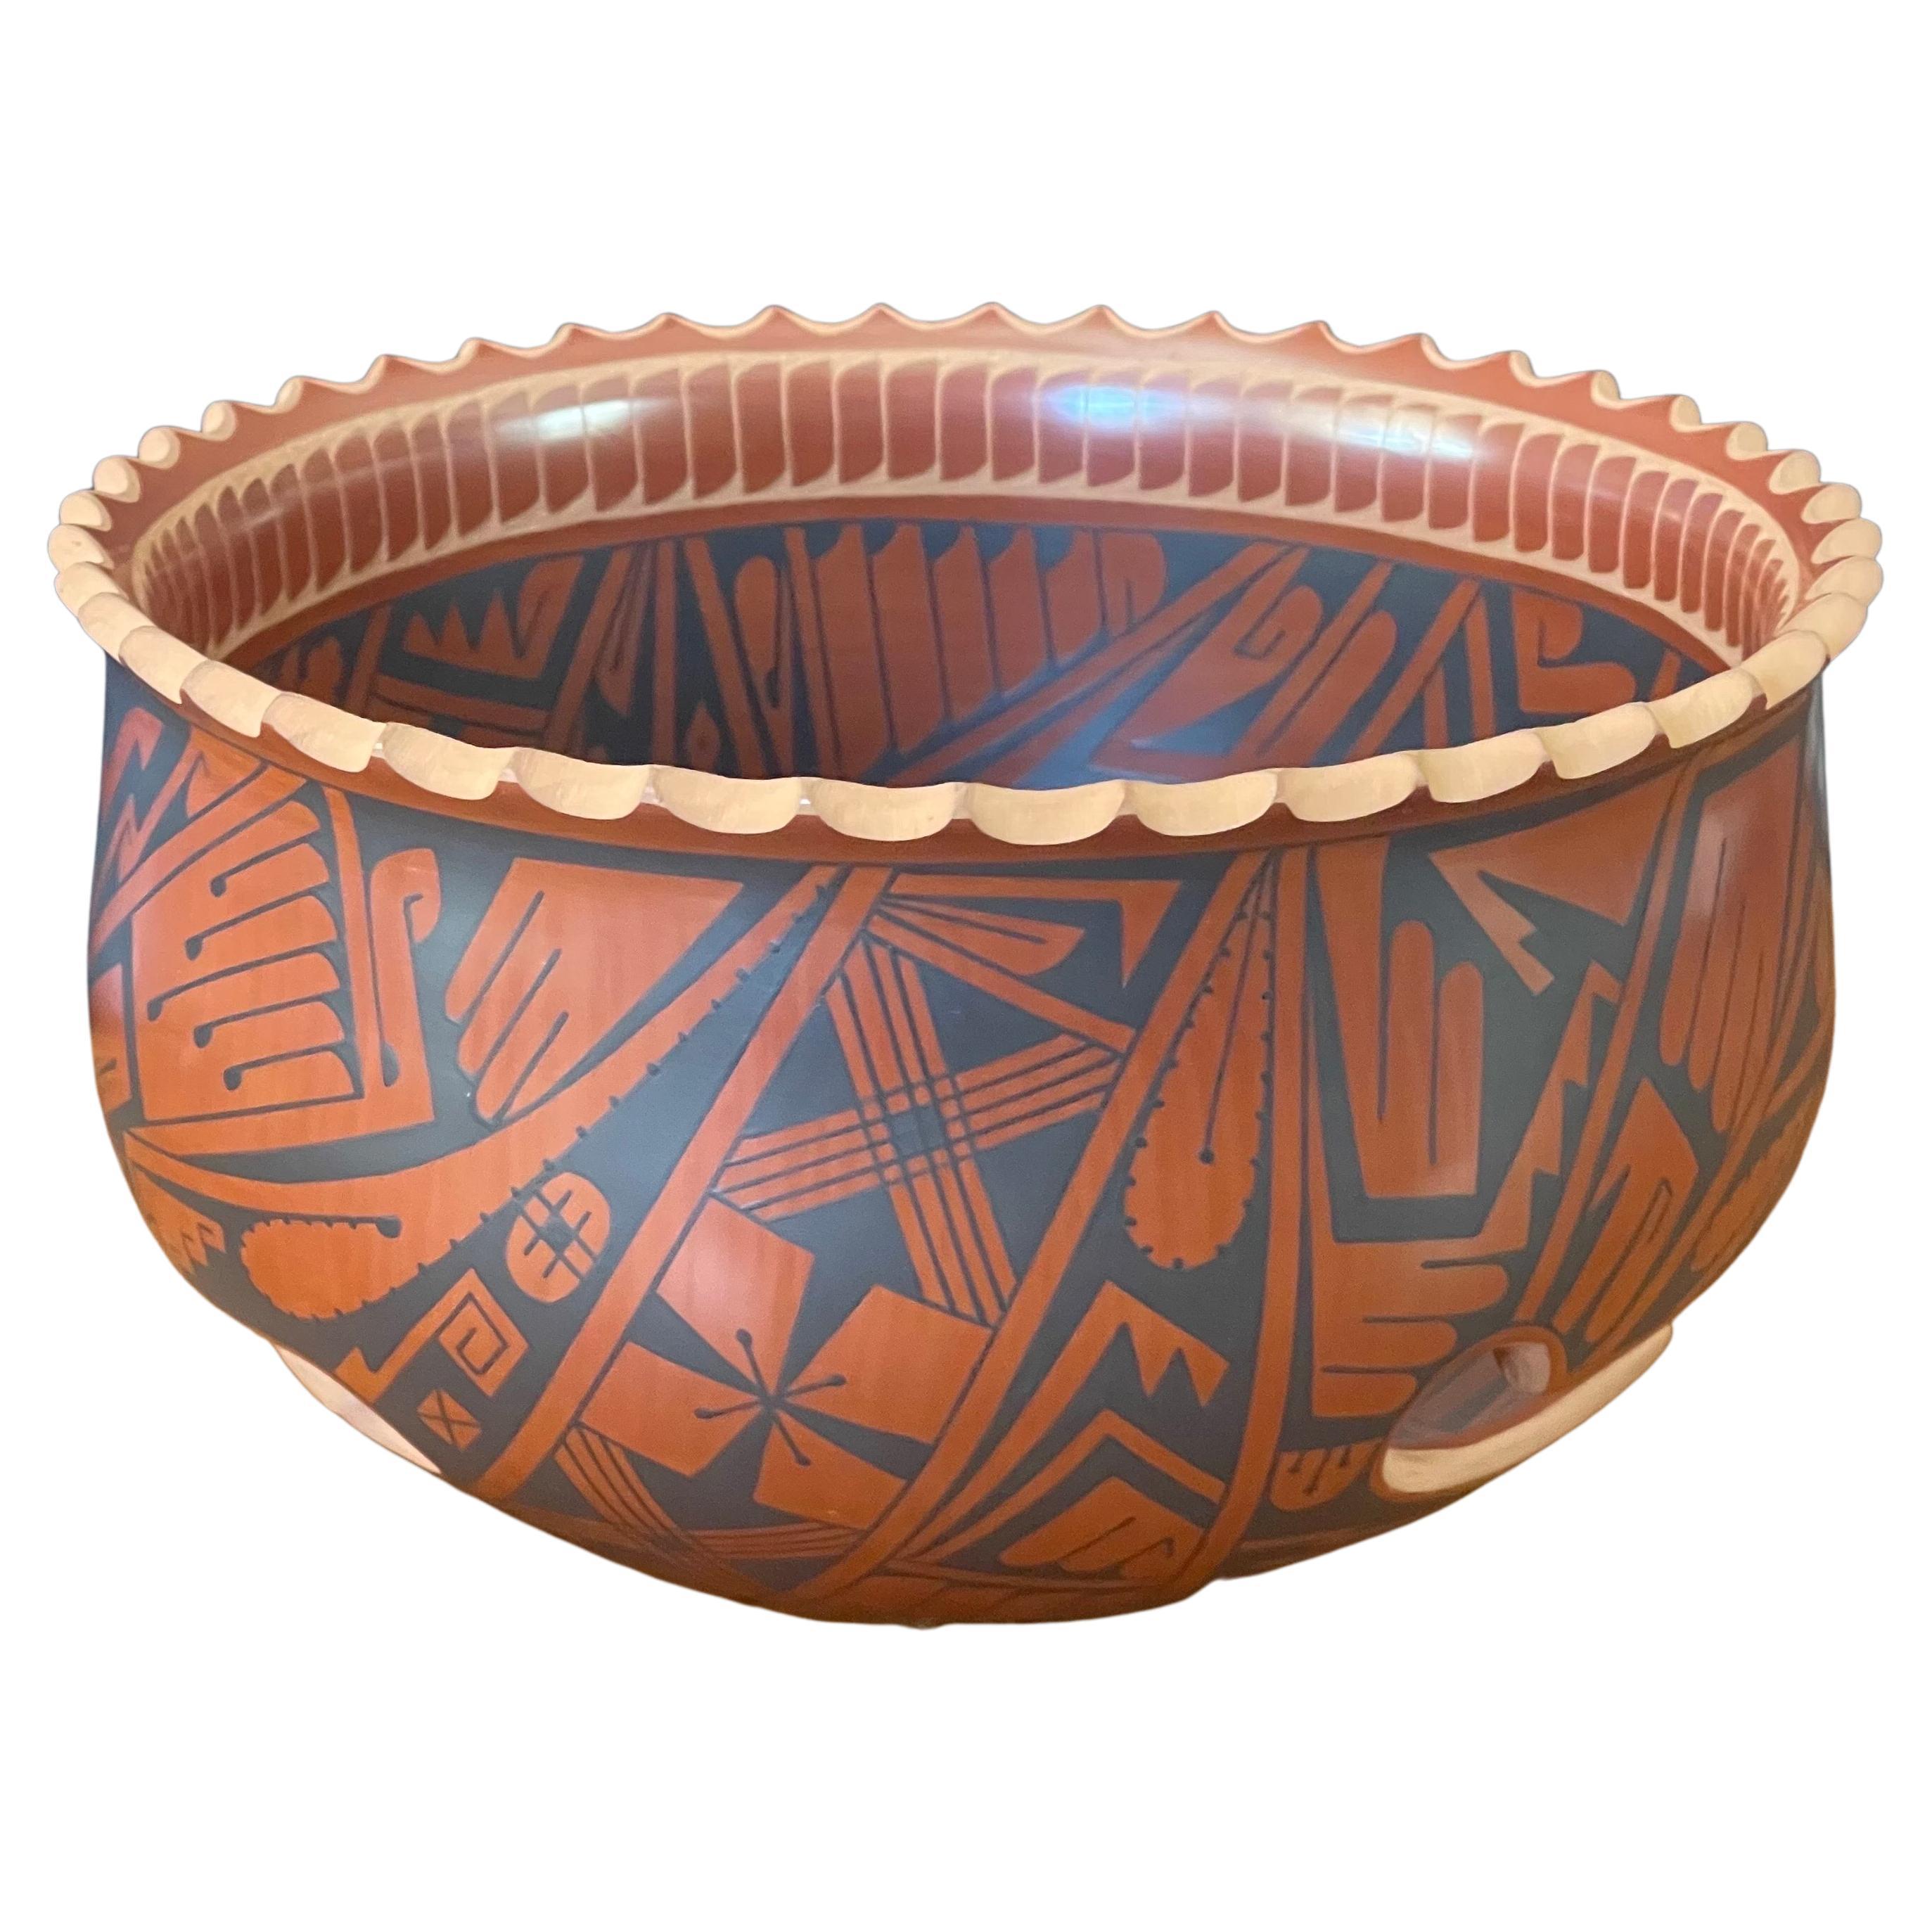 "Paquime Pottery" Decorative Bowl by Baudel Lopez Corona for Mata Ortiz For Sale